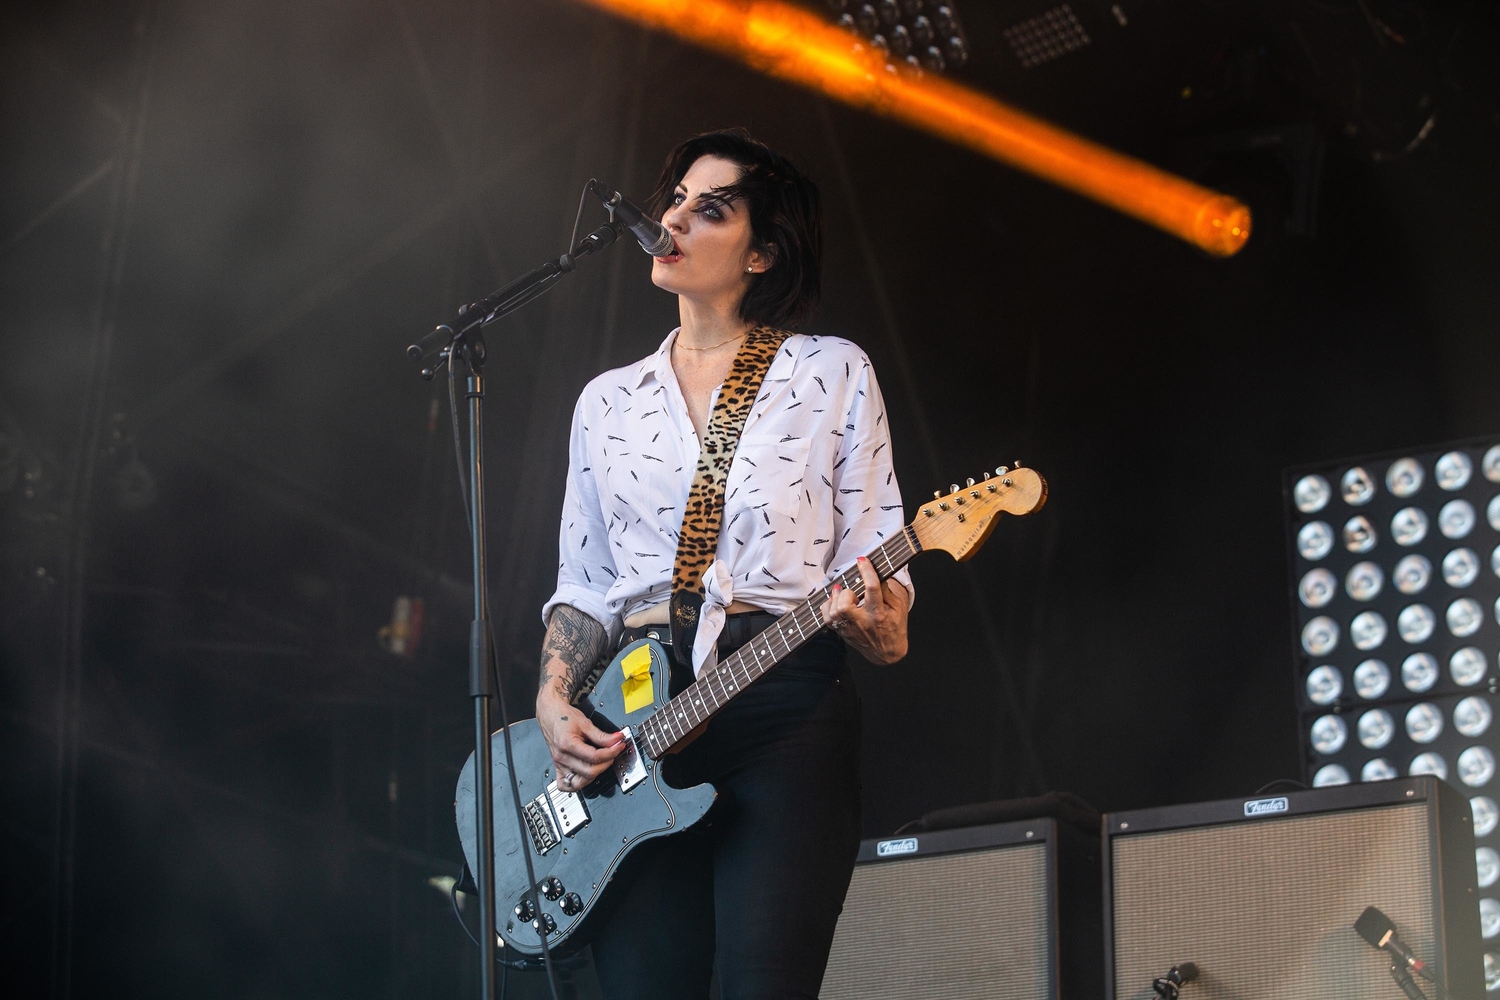 The Distillers are releasing a limited edition vinyl of 'Man vs Magnet' through Third Man Records